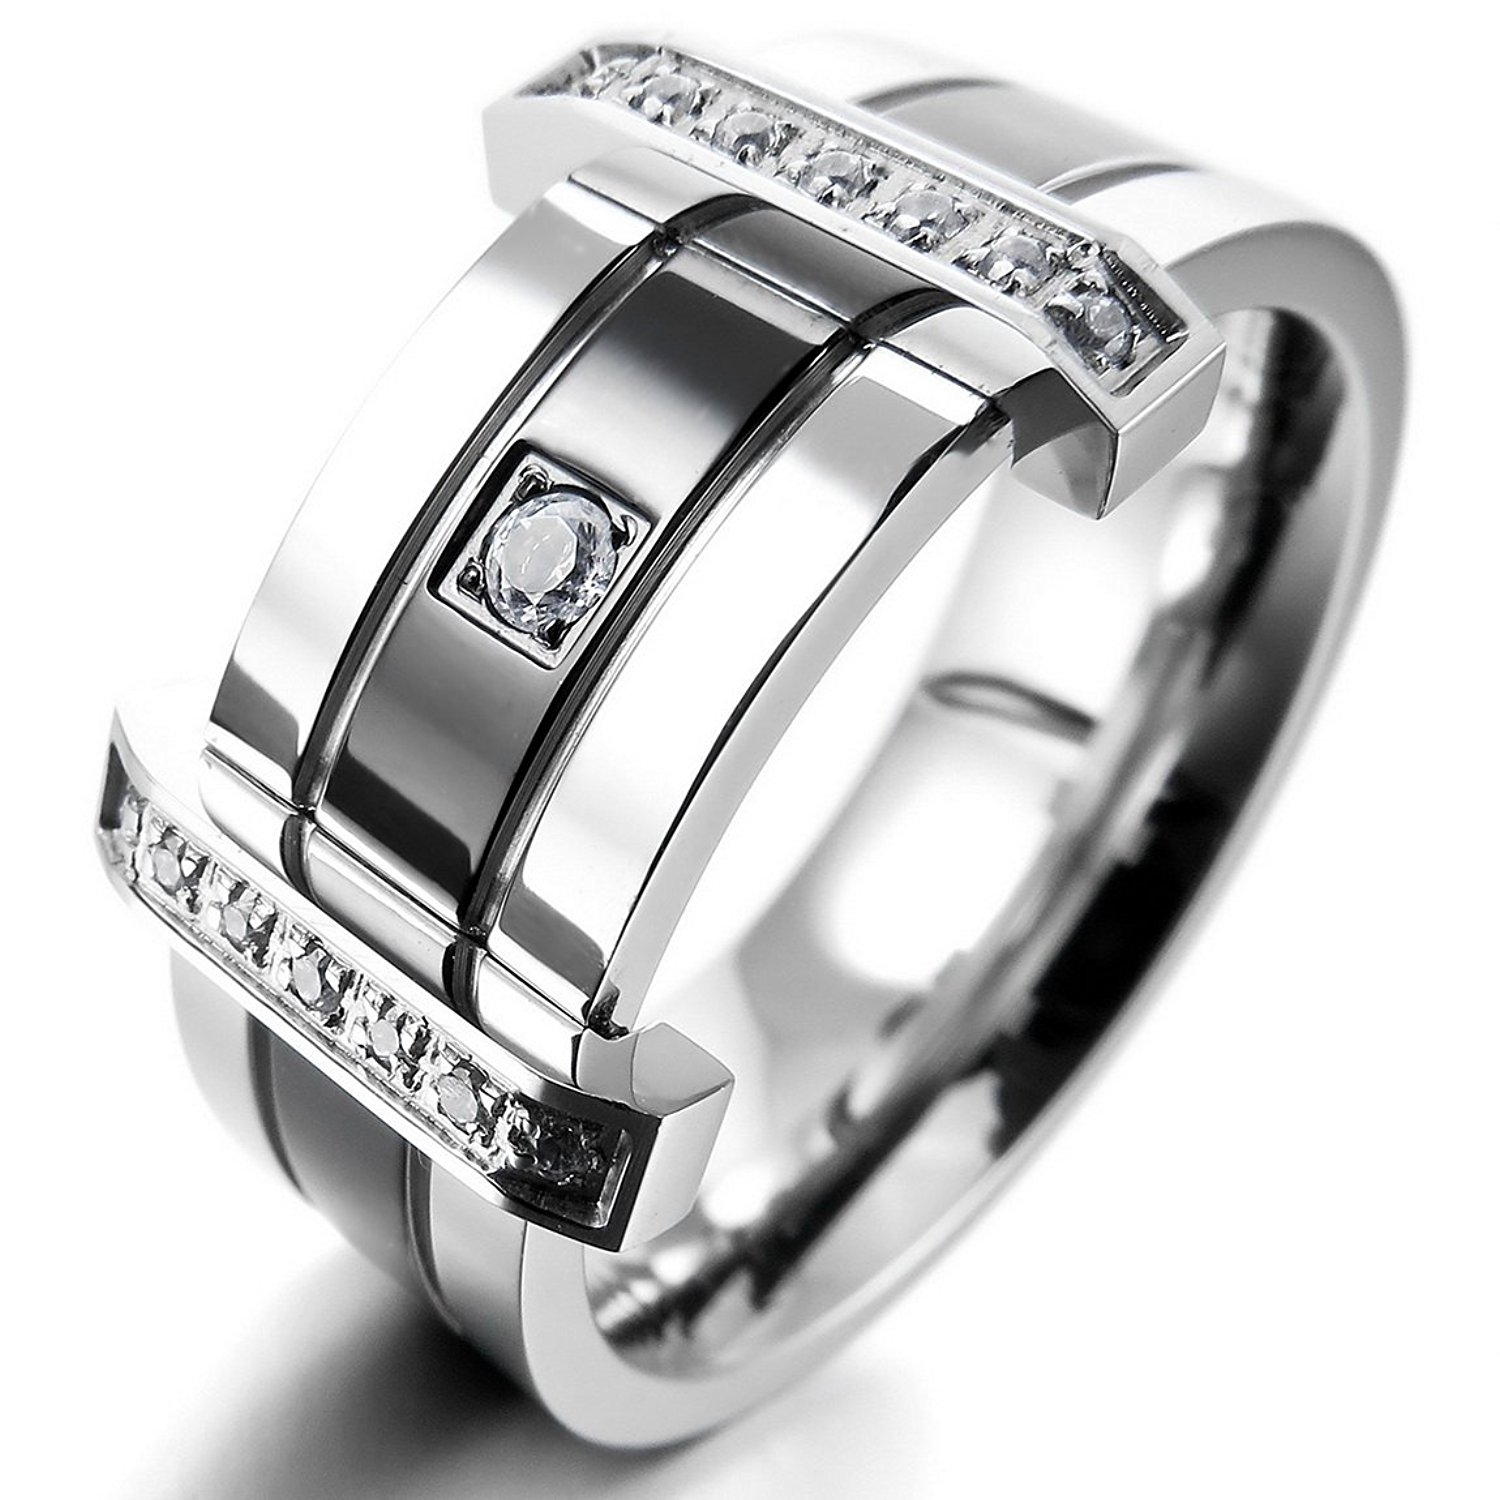 Amazon.com: INBLUE Men's Stainless Steel Ring Band CZ Silver Tone ...